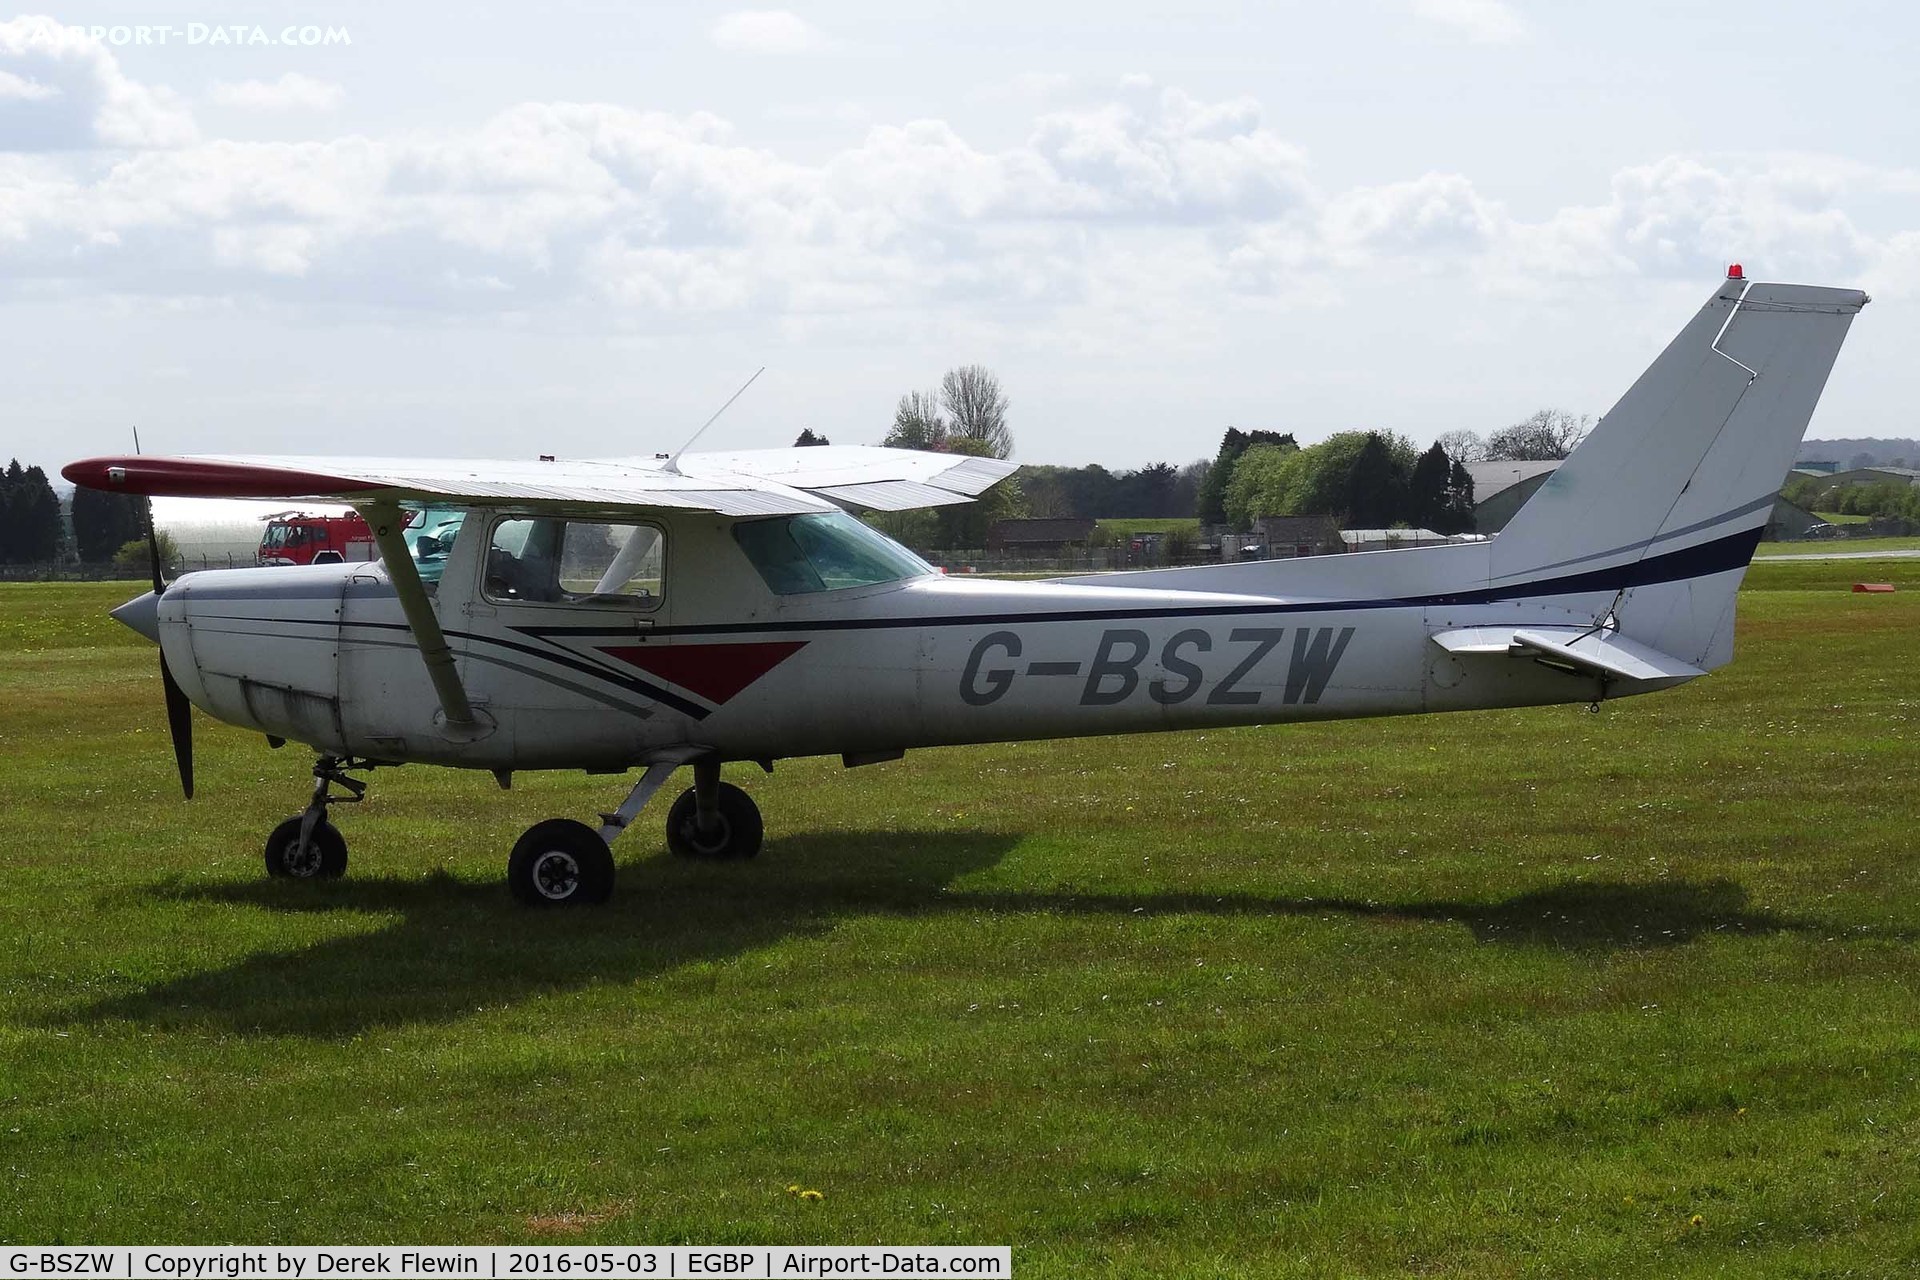 G-BSZW, 1977 Cessna 152 C/N 152-81072, 152, Stars Fly Flying School Elstree based, previously N48958, seen parked up.